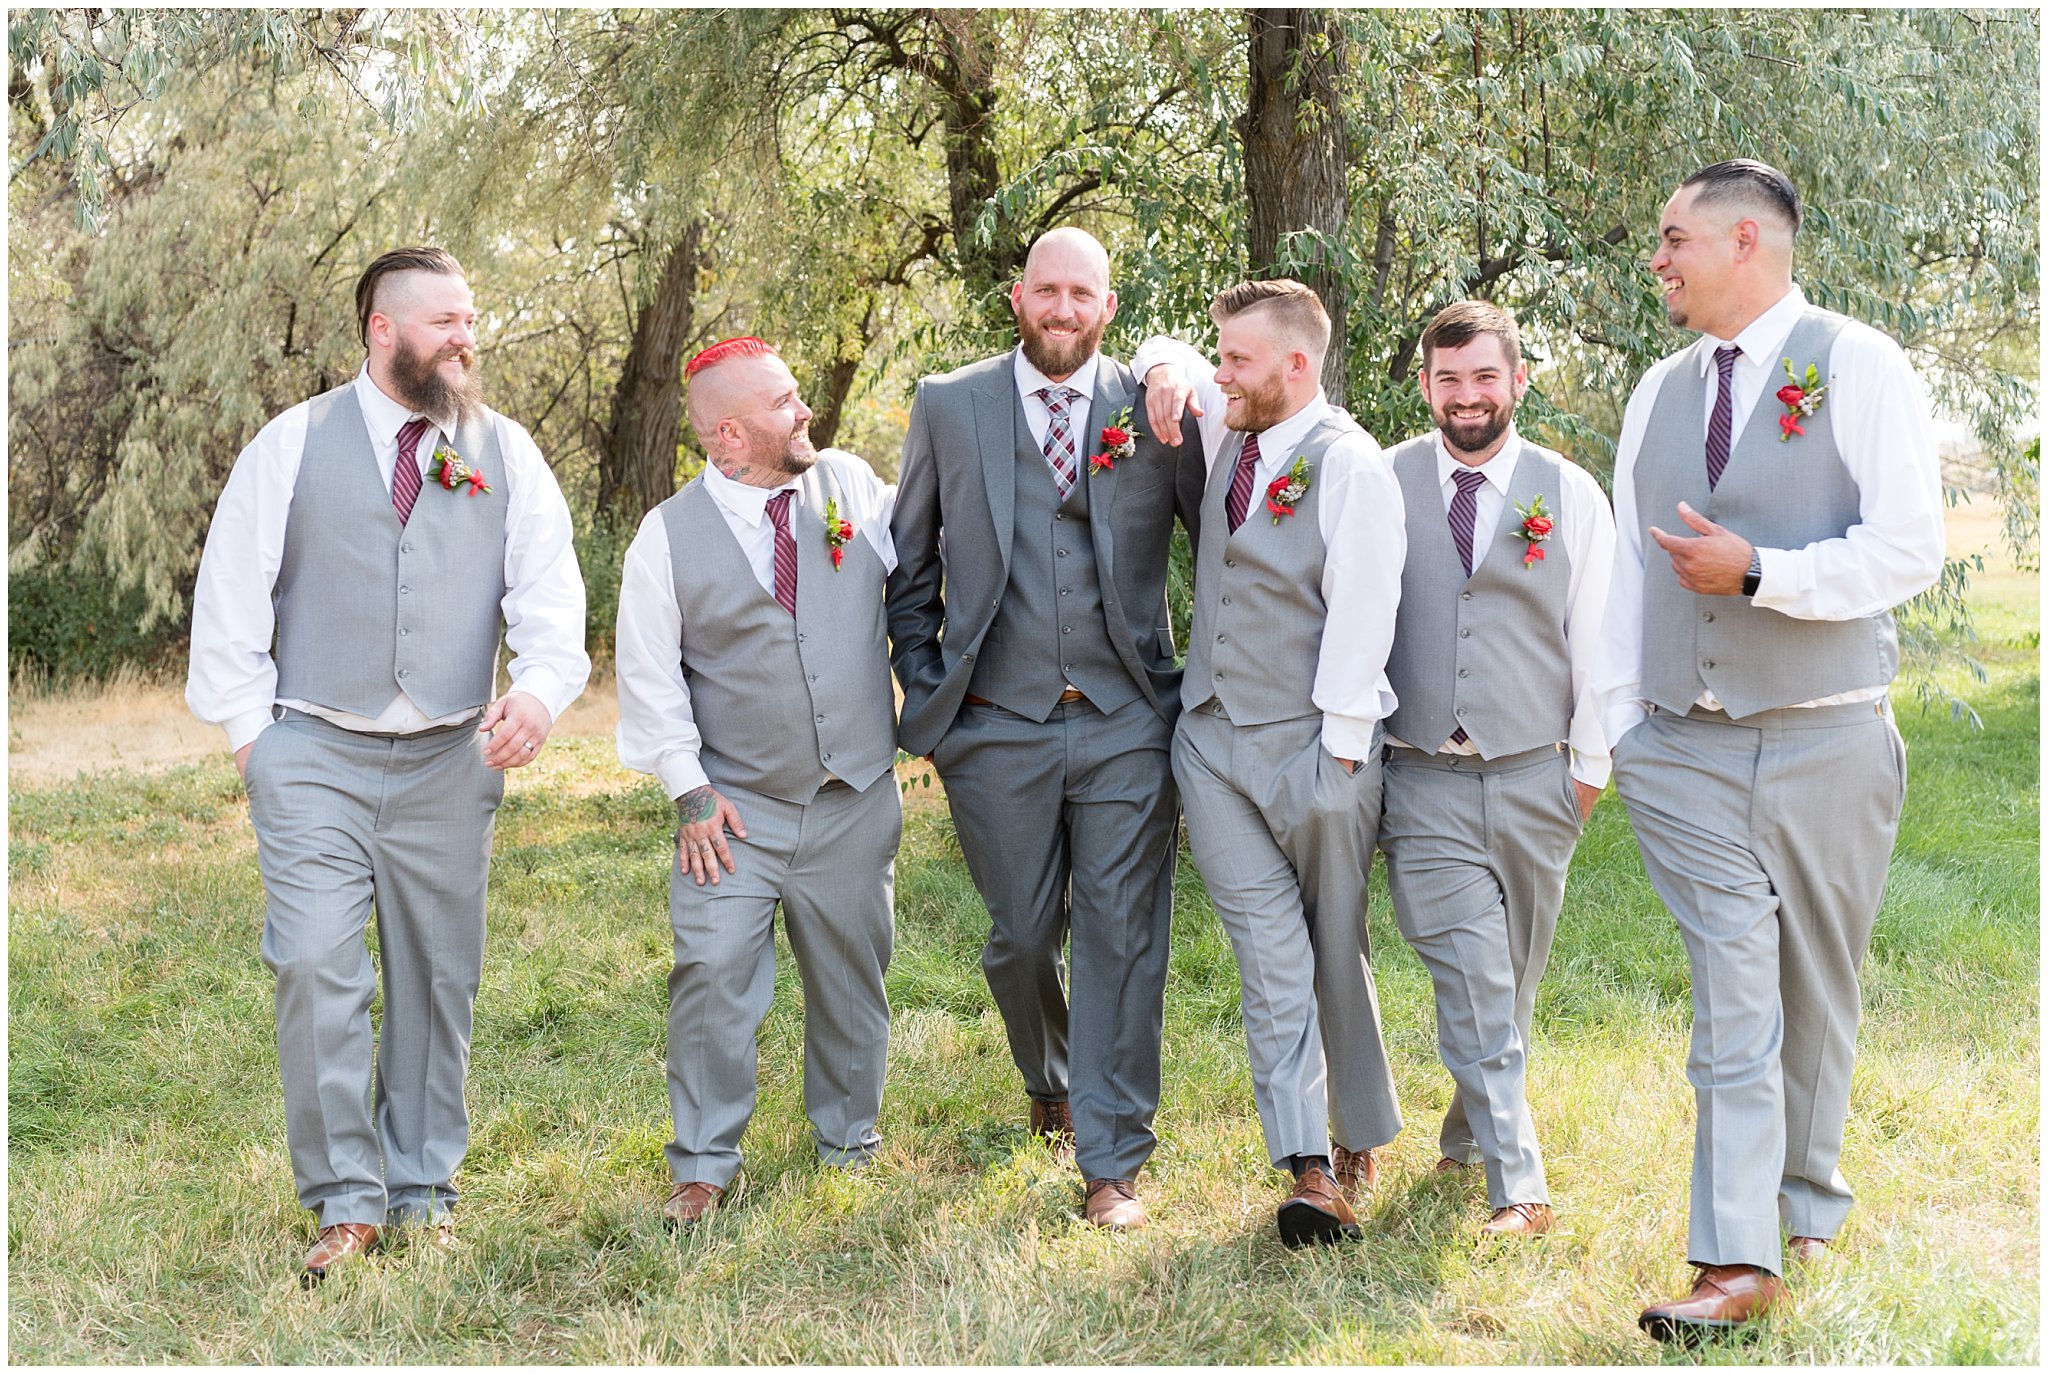 Groom and groomsmen in grey suits walking and having fun | Davis County Outdoor Wedding | Jessie and Dallin Photography